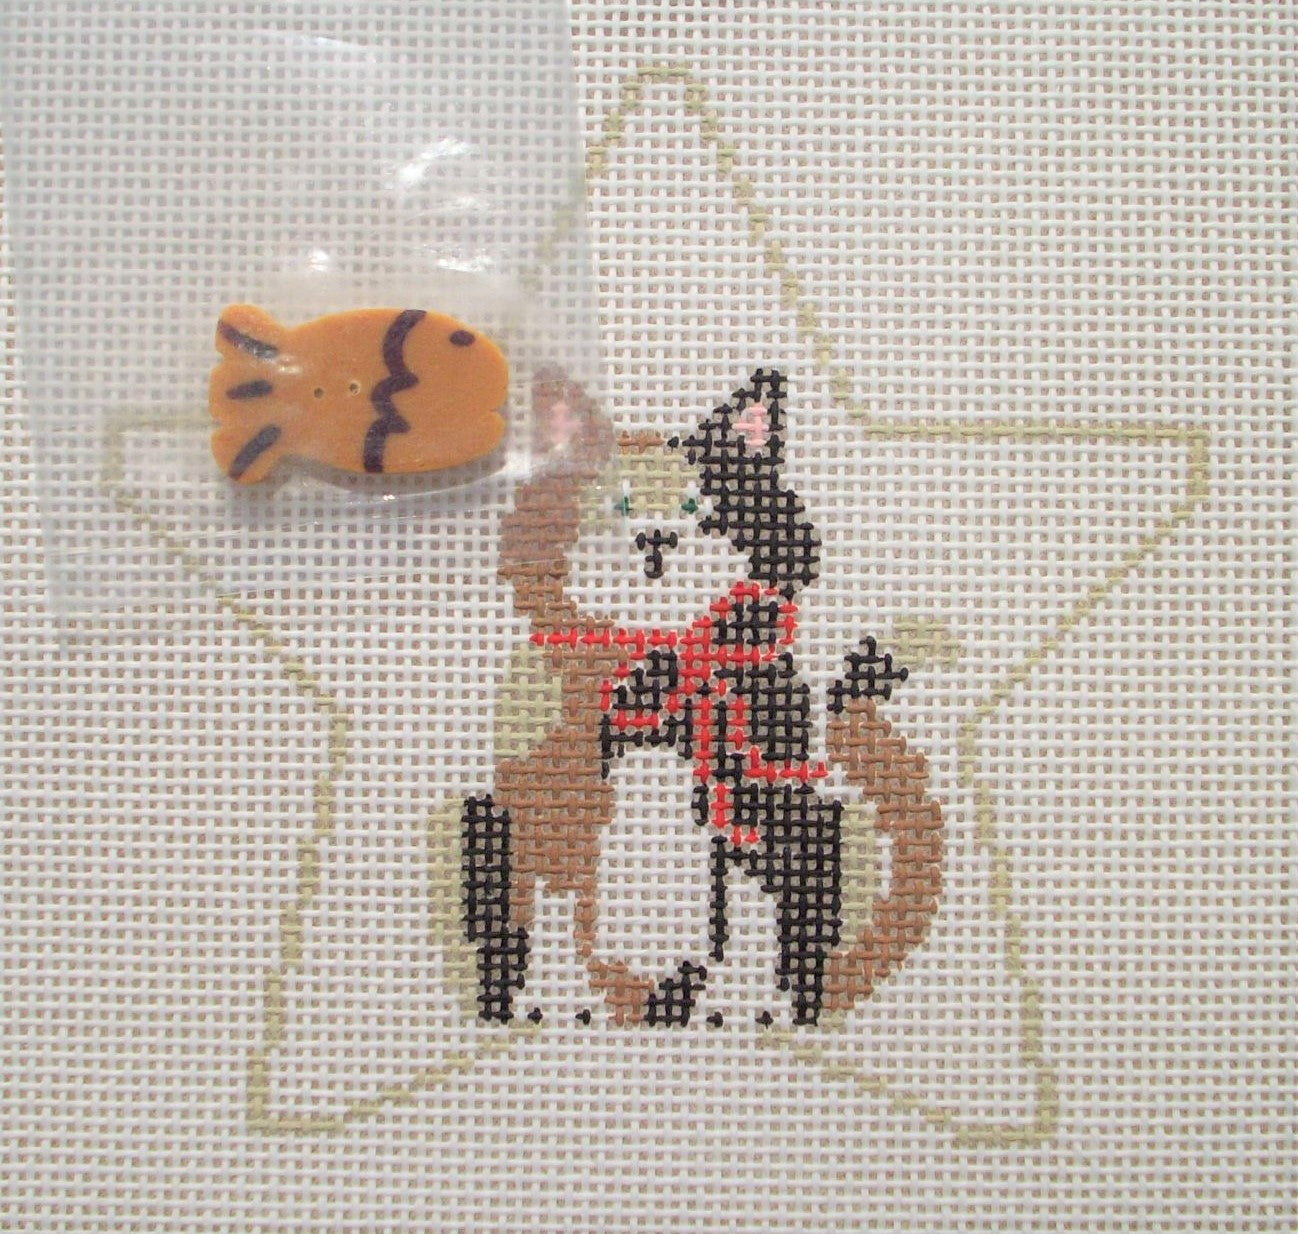 ST102 Calico Cat Star with Fish Button